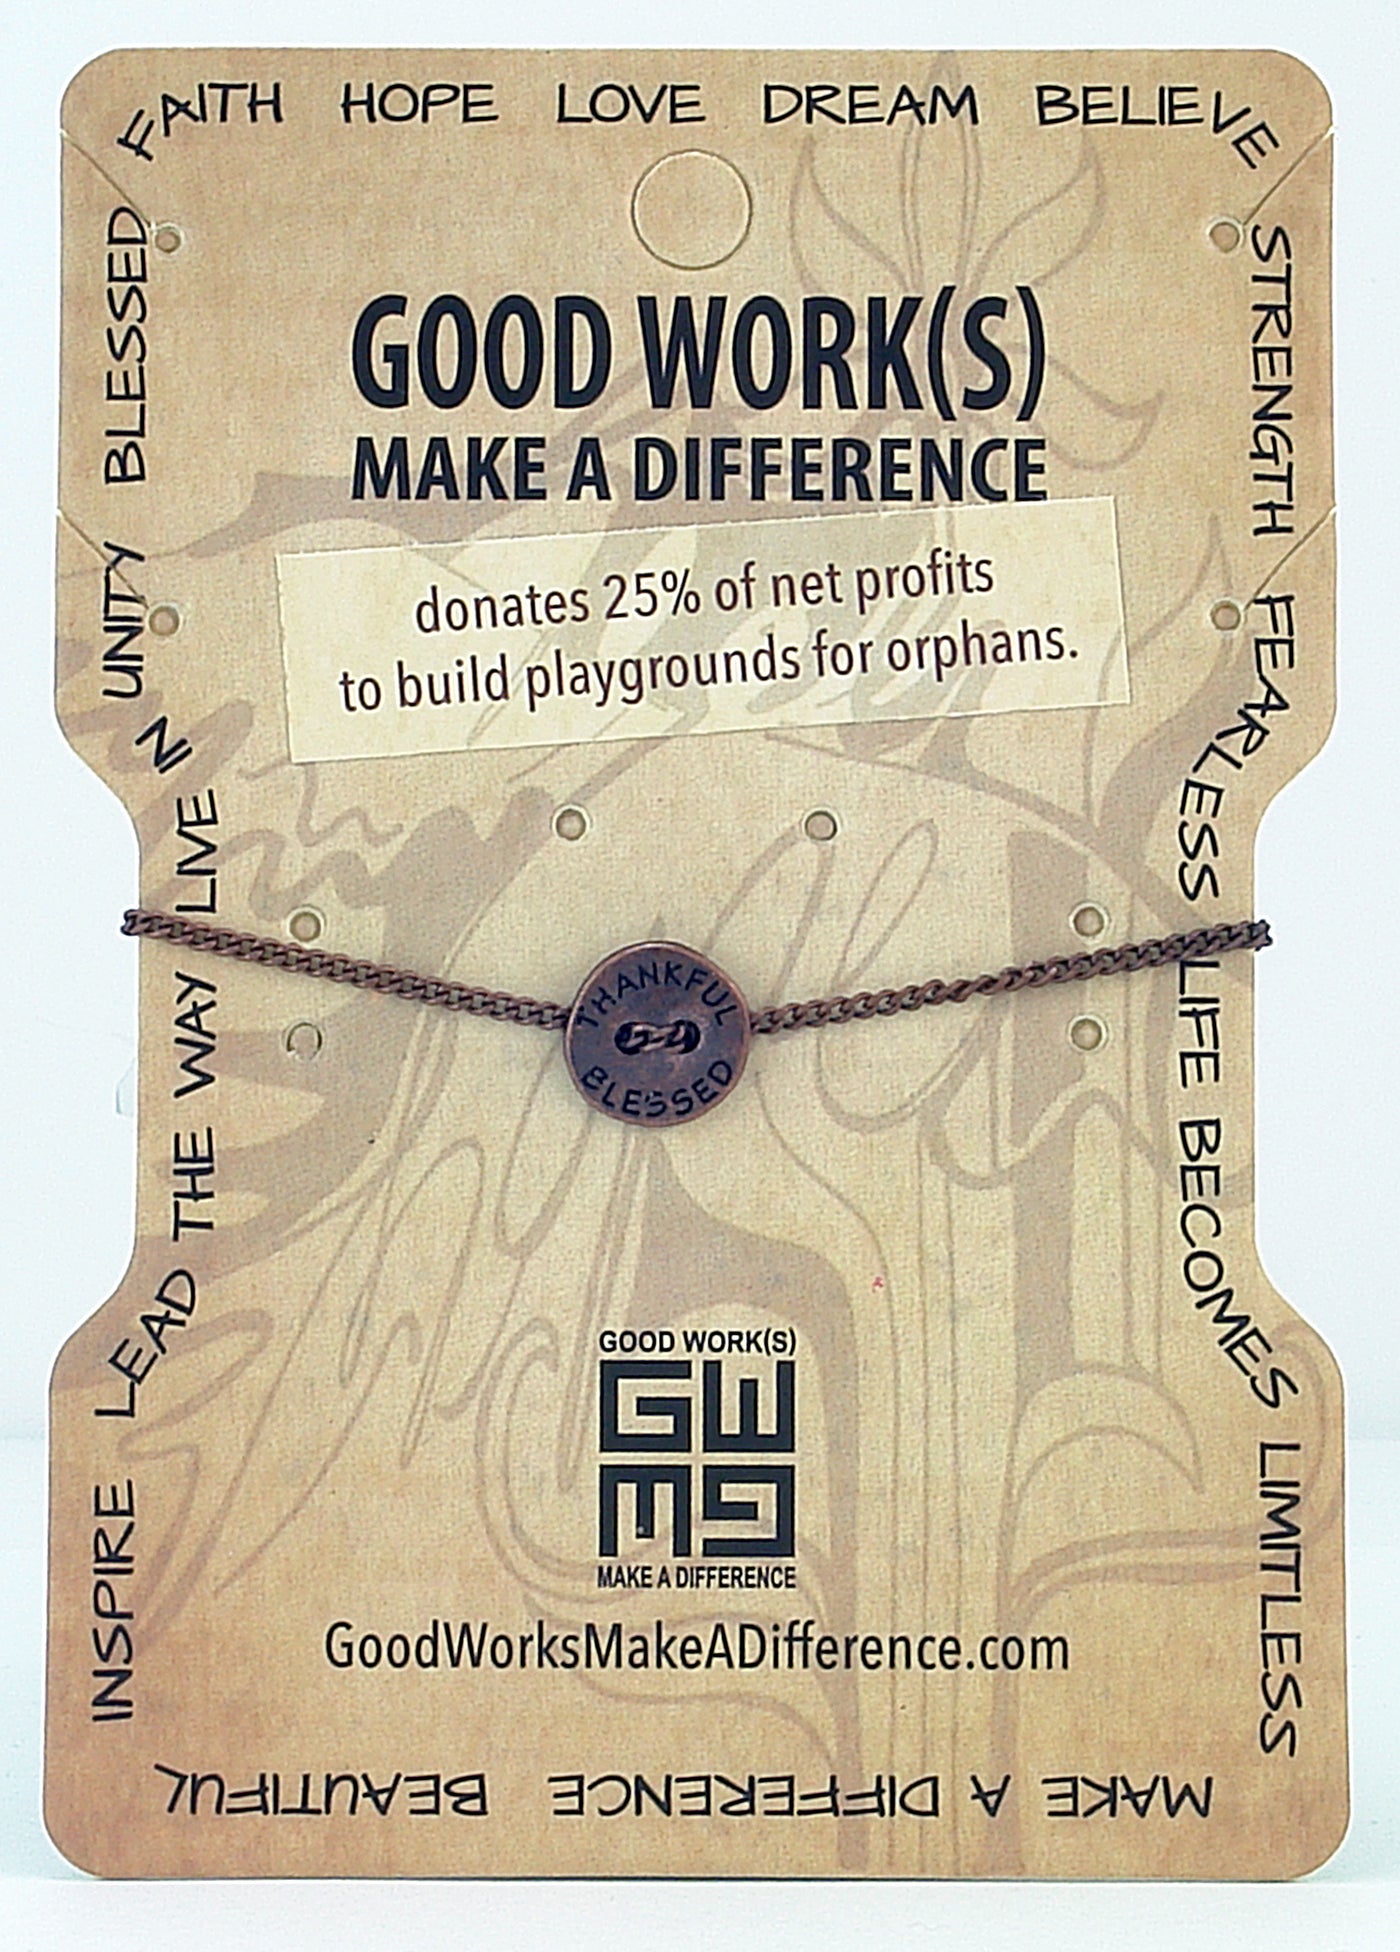 Happy Bracelet-Good Work(s) Make A Difference® | Christian and Inspirational Jewelry Company in Vernon, California